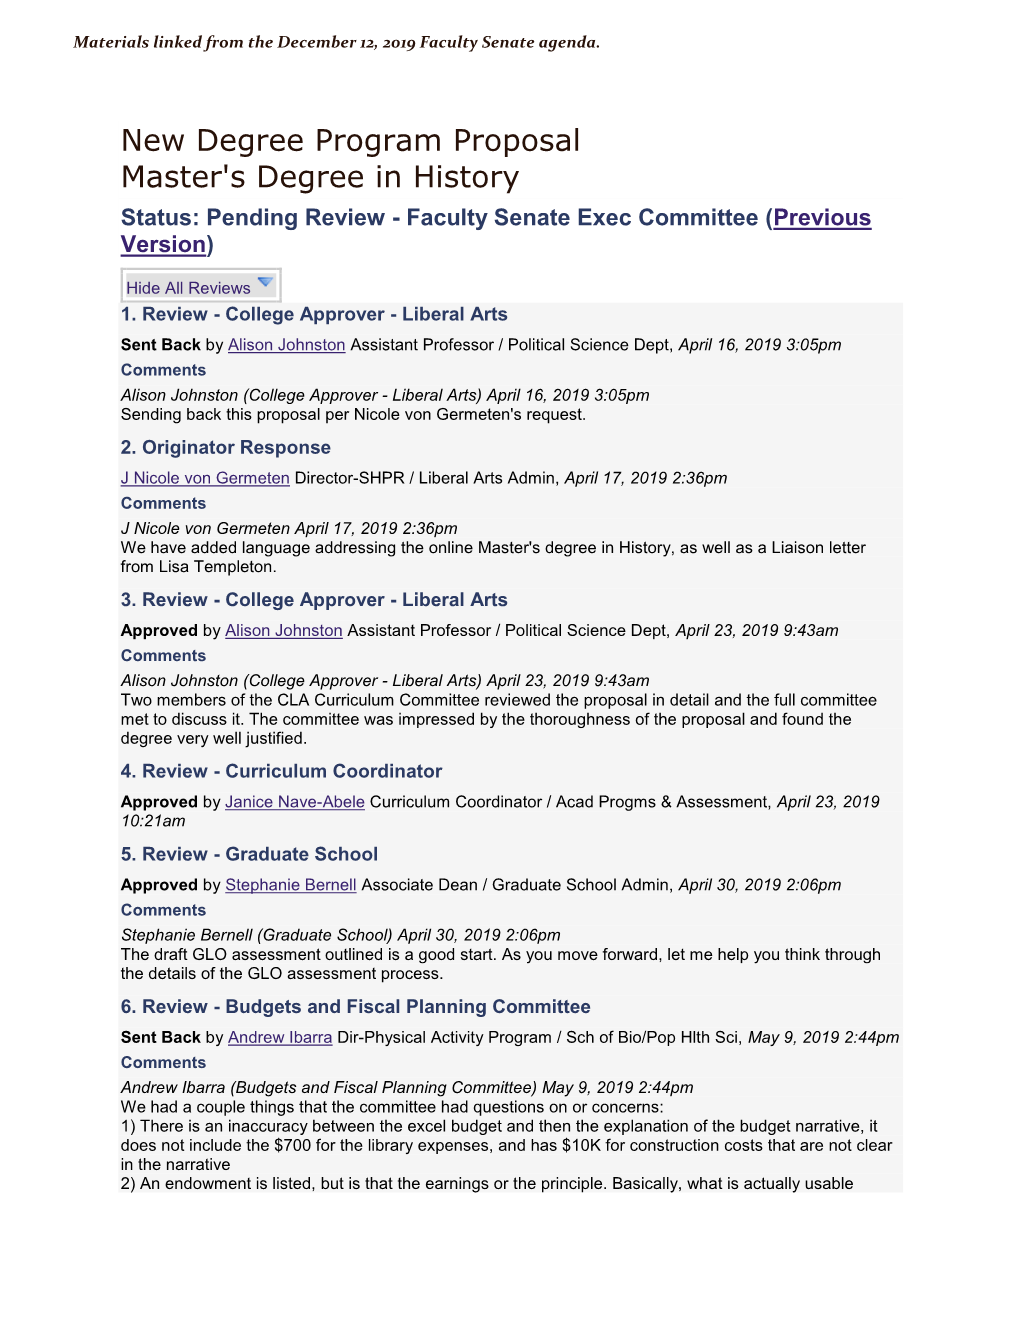 New Degree Program Proposal Master's Degree in History Status: Pending Review - Faculty Senate Exec Committee (Previous Version)